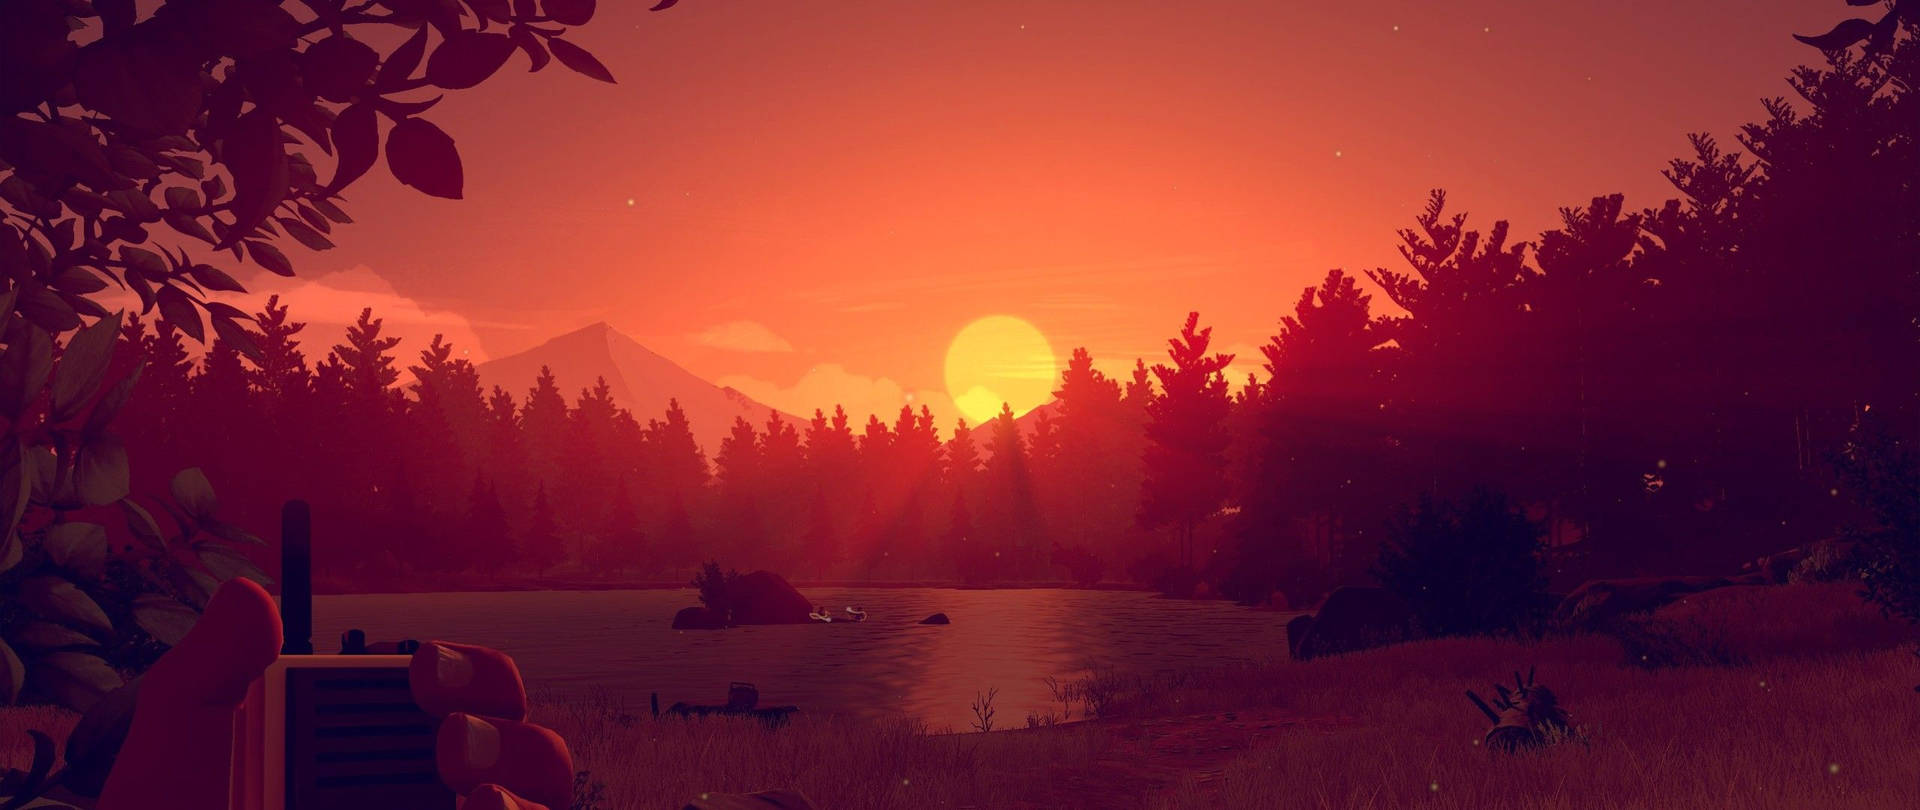 Download Animated Sunset In Forest Wallpaper 